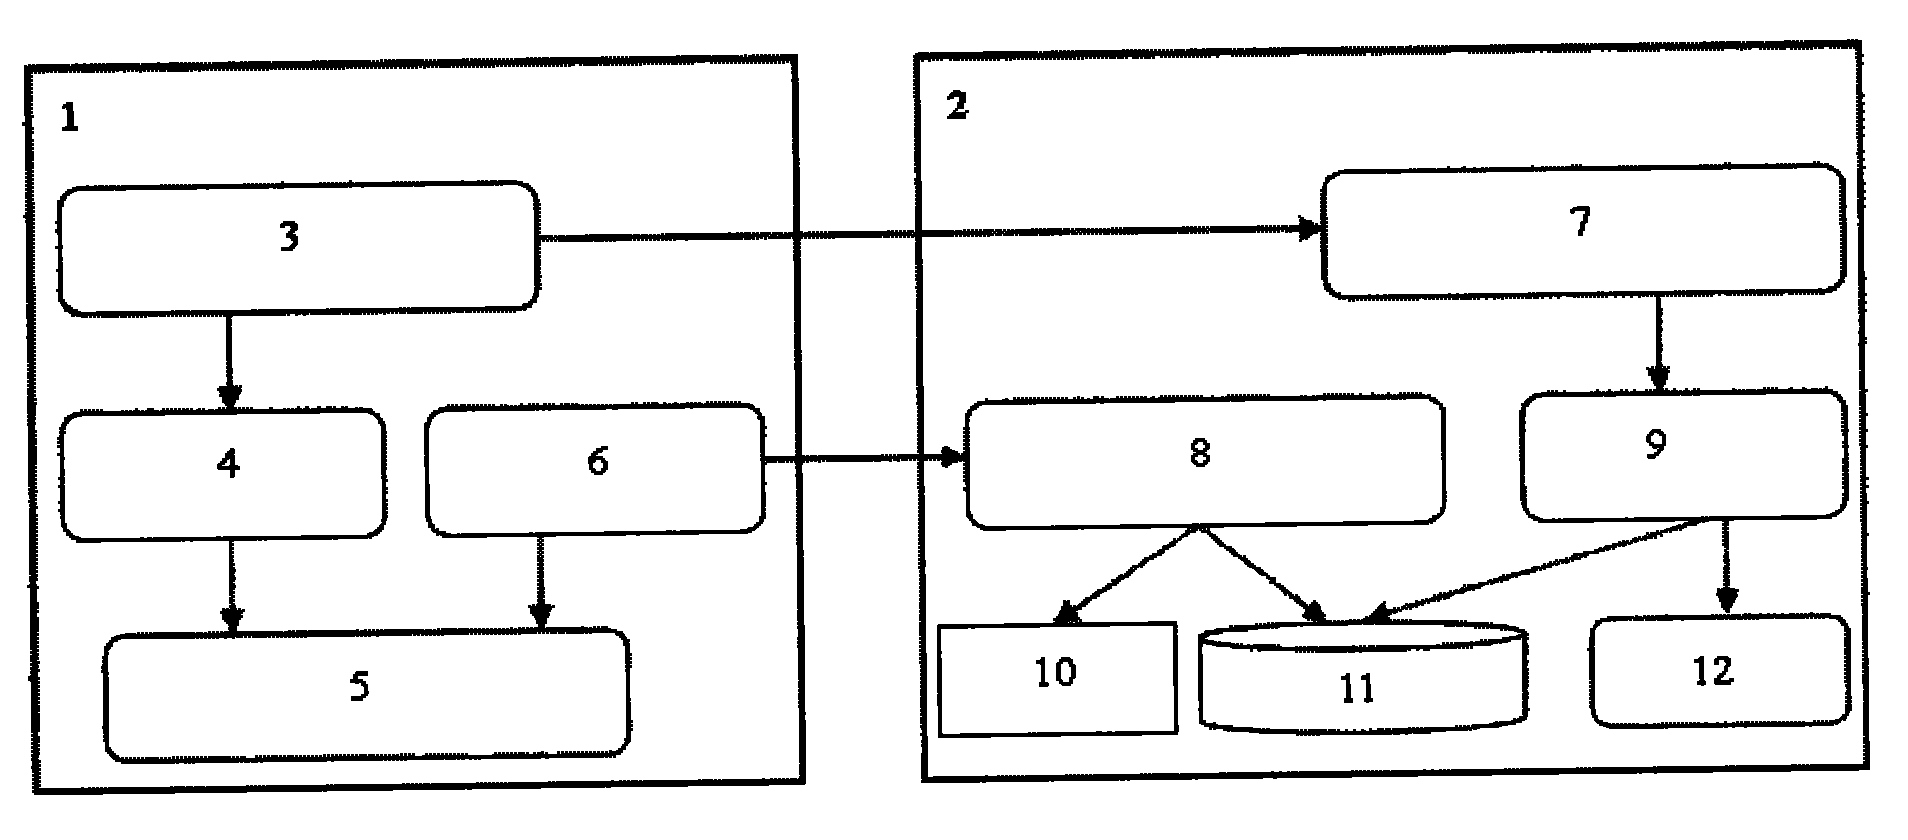 Key management system and method for bank terminal security equipment